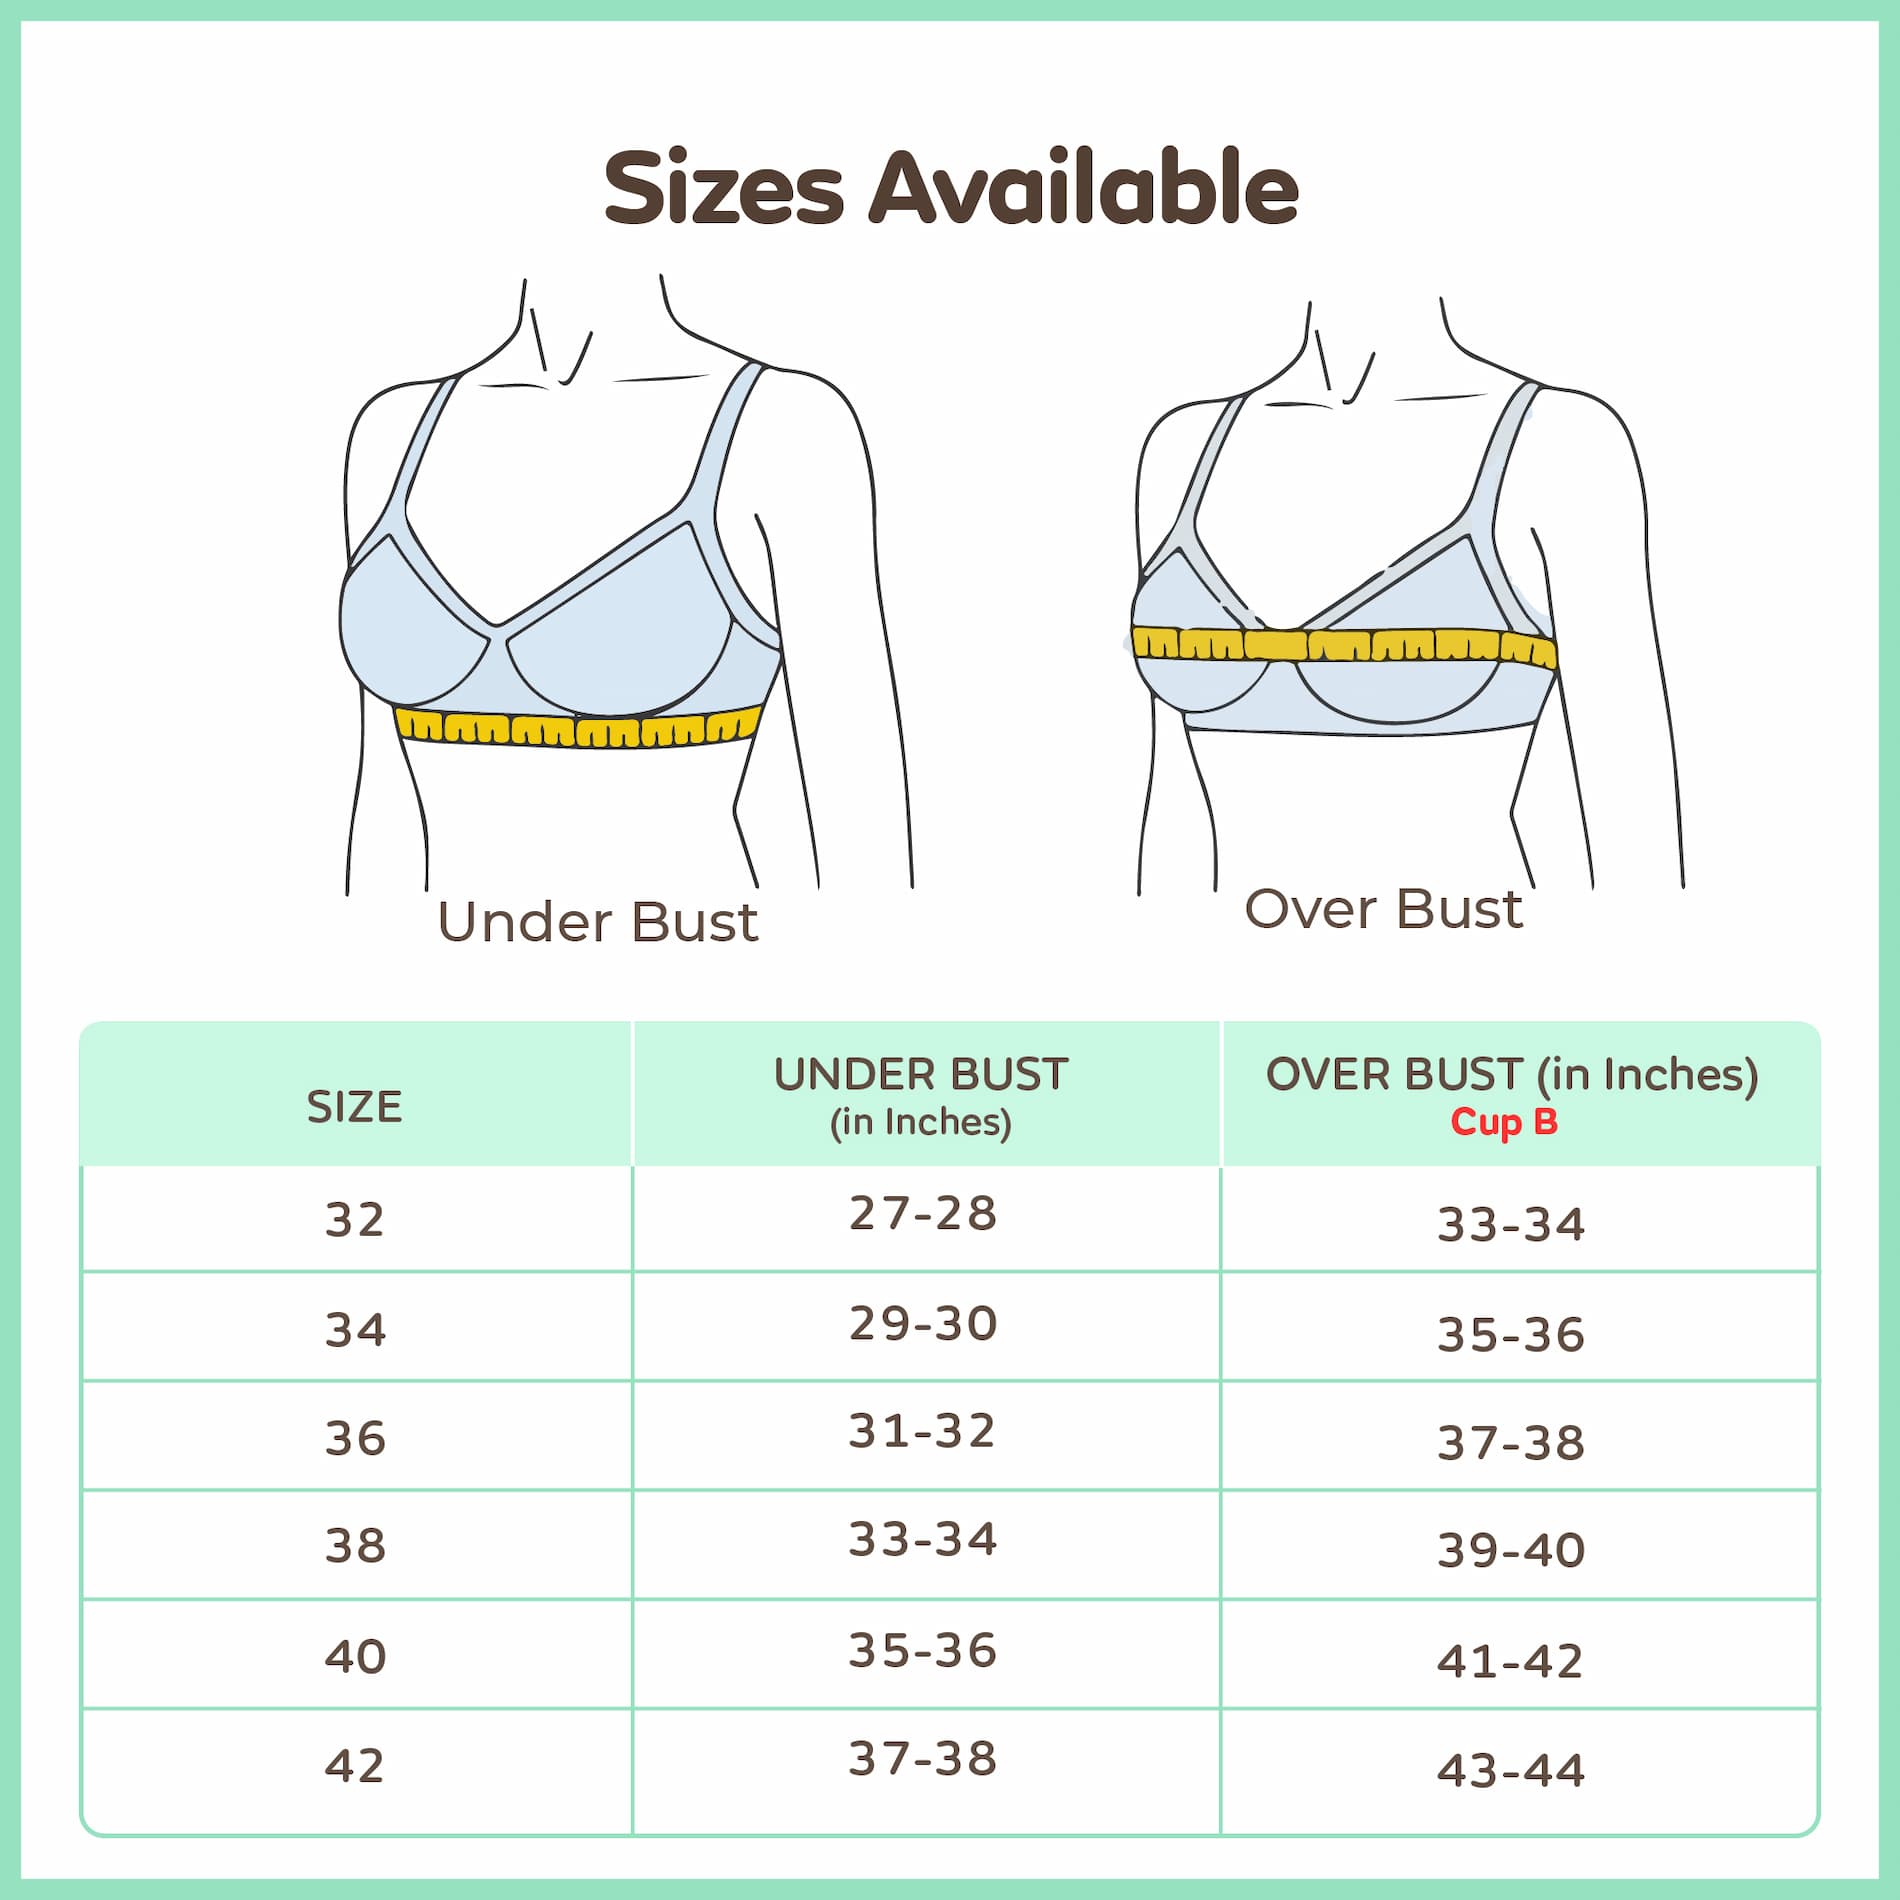 Maternity/Nursing Moulded Cup Extra Comfort Bra with free Bra Extender (Pack of 3) - Pink,Blue, DustyGrey- 40B 